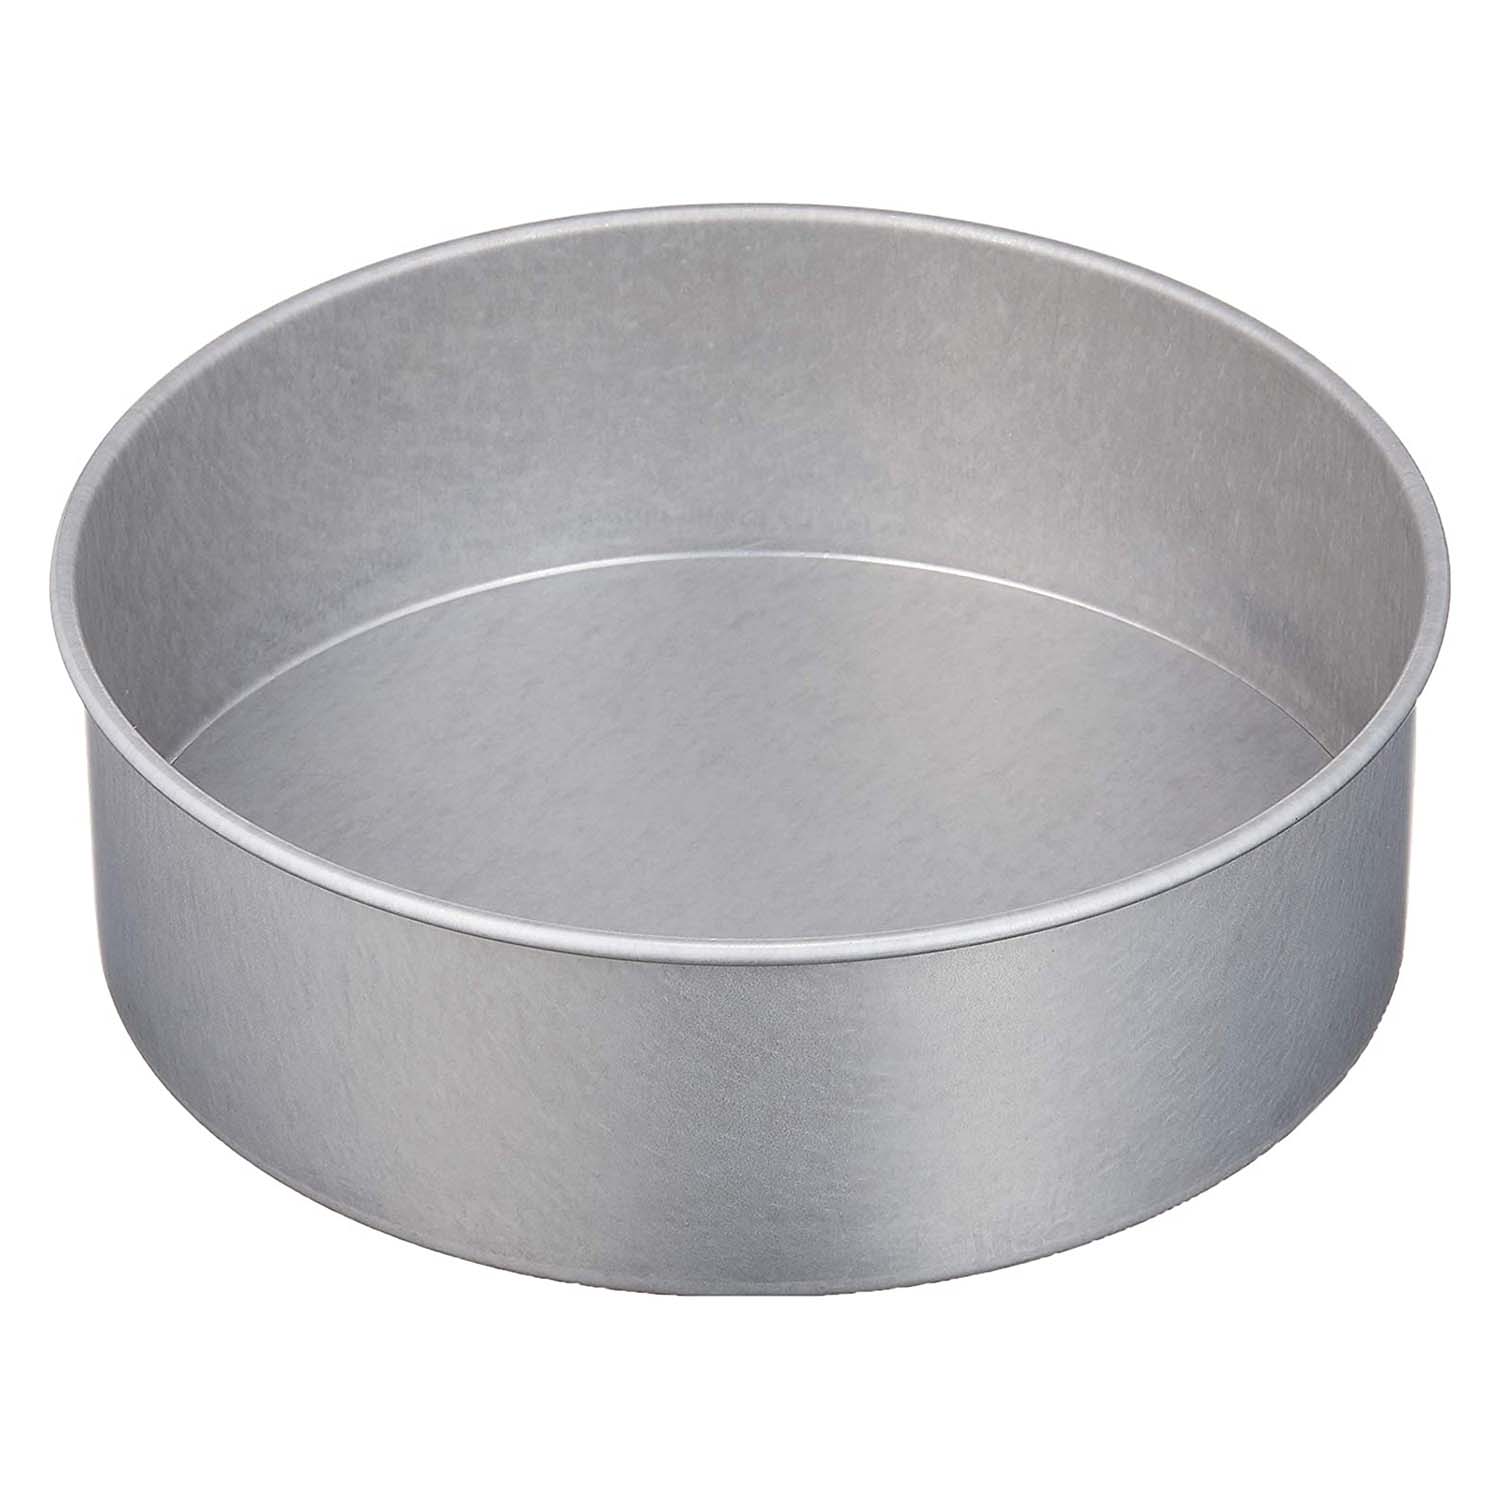 Cuisinart AMB-9RCK 23cm Chef's Classic Nonstick Bakeware Round Cake Pan,  Silver by Cuisinart - Shop Online for Kitchen in New Zealand